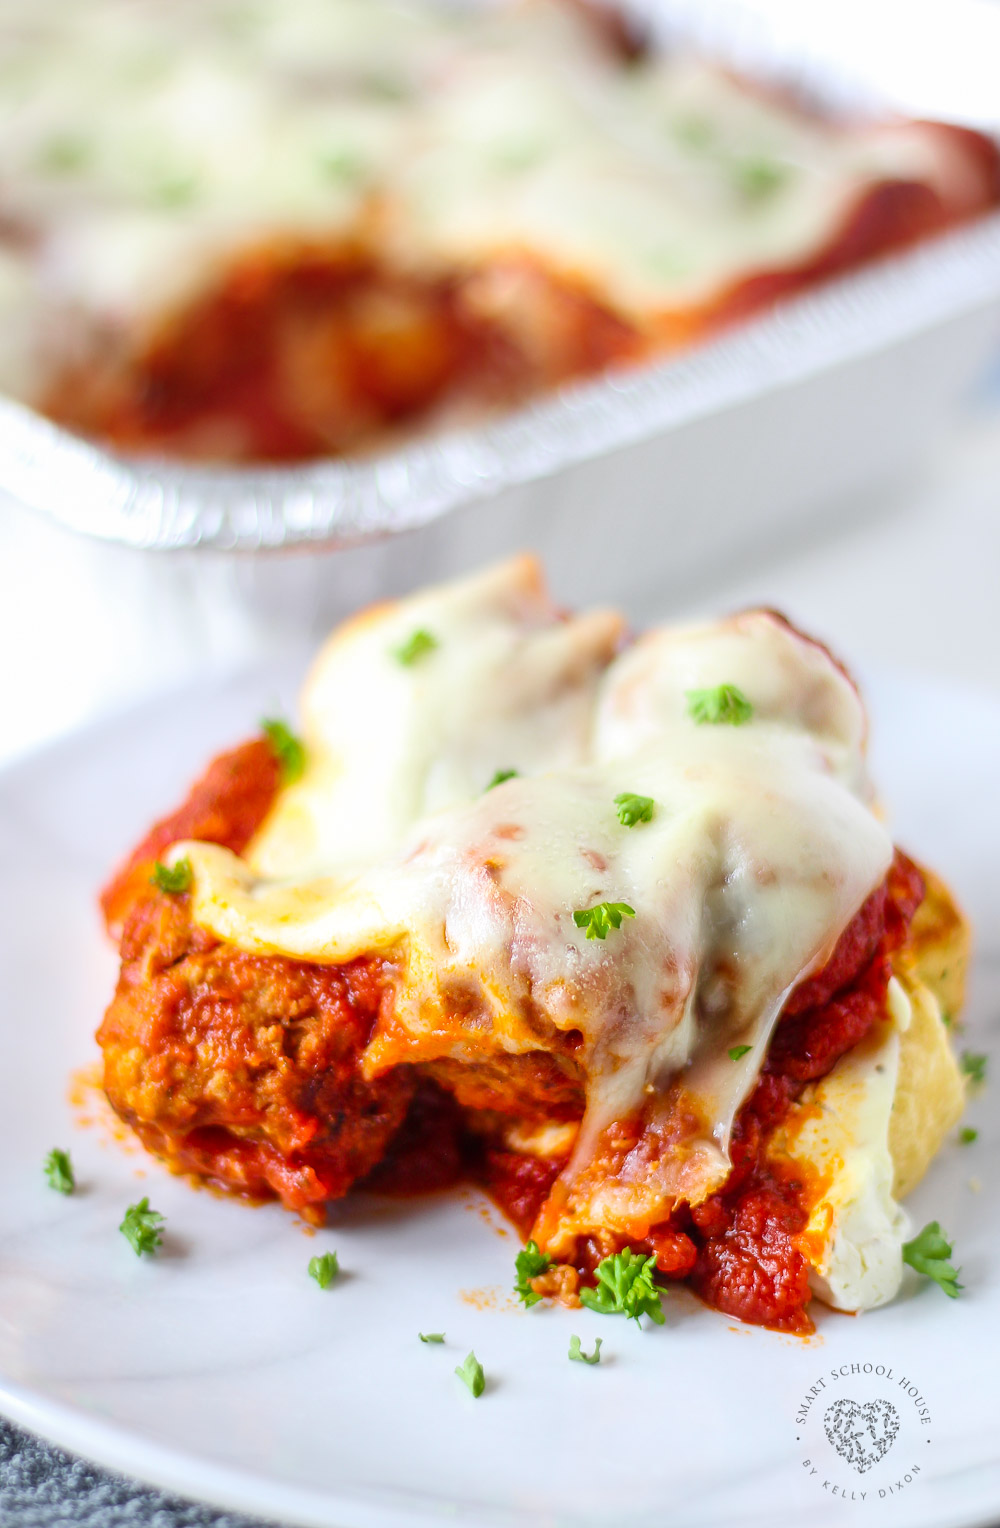 Meatball Sub Casserole - Layers of meatballs, creamy mozzarella cheese, and a special cheese sauce all on top of garlic toast. This casserole a perfect weeknight dinner.